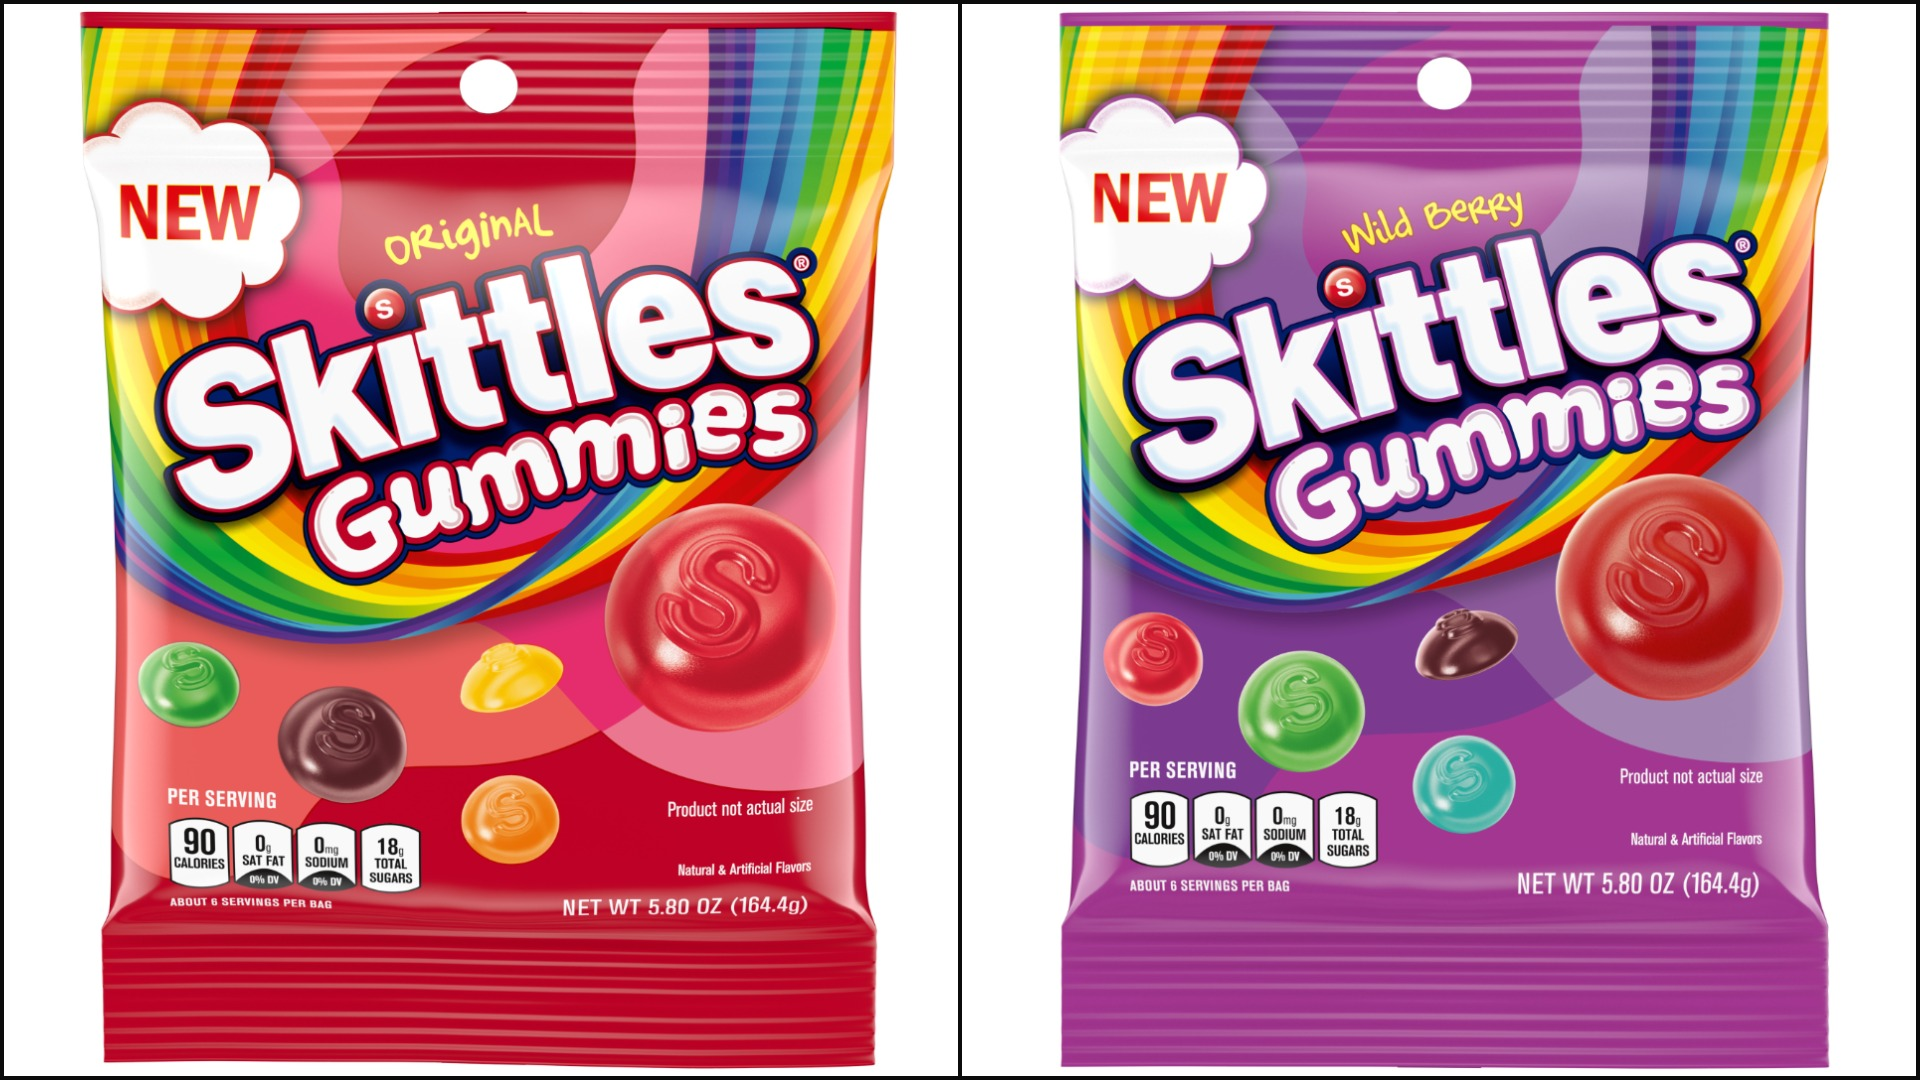 Product shot of the two new Skittles Gummies bags